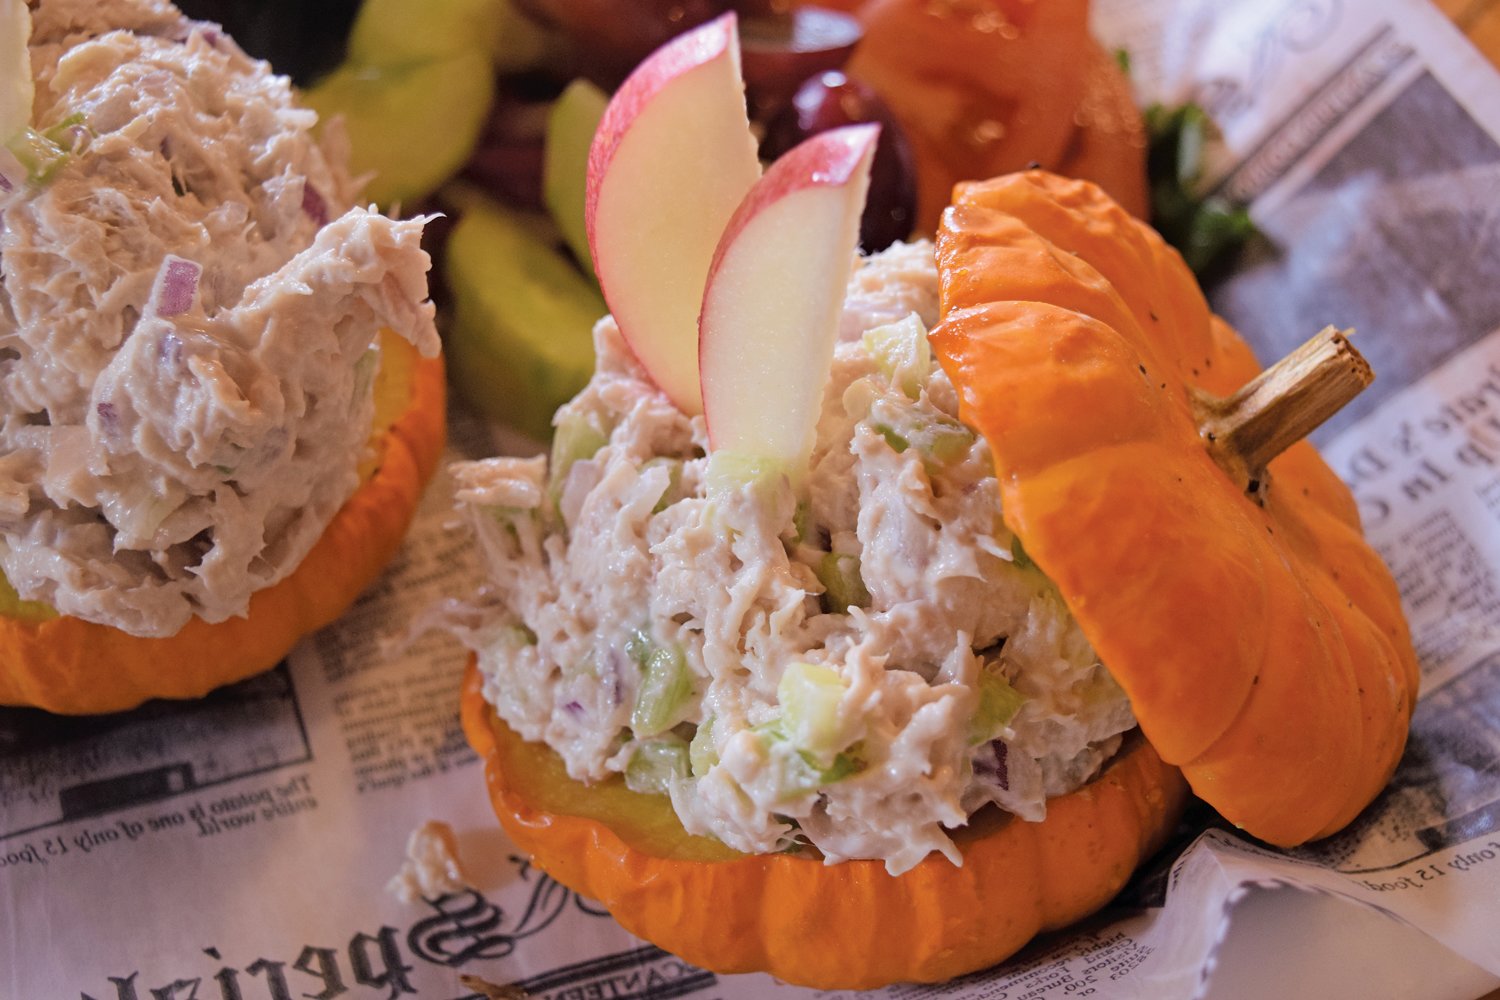 Chicken salad in a seasonal mini-pumpkin is a customer favorite at the Pour House. Photograph by Pour House.